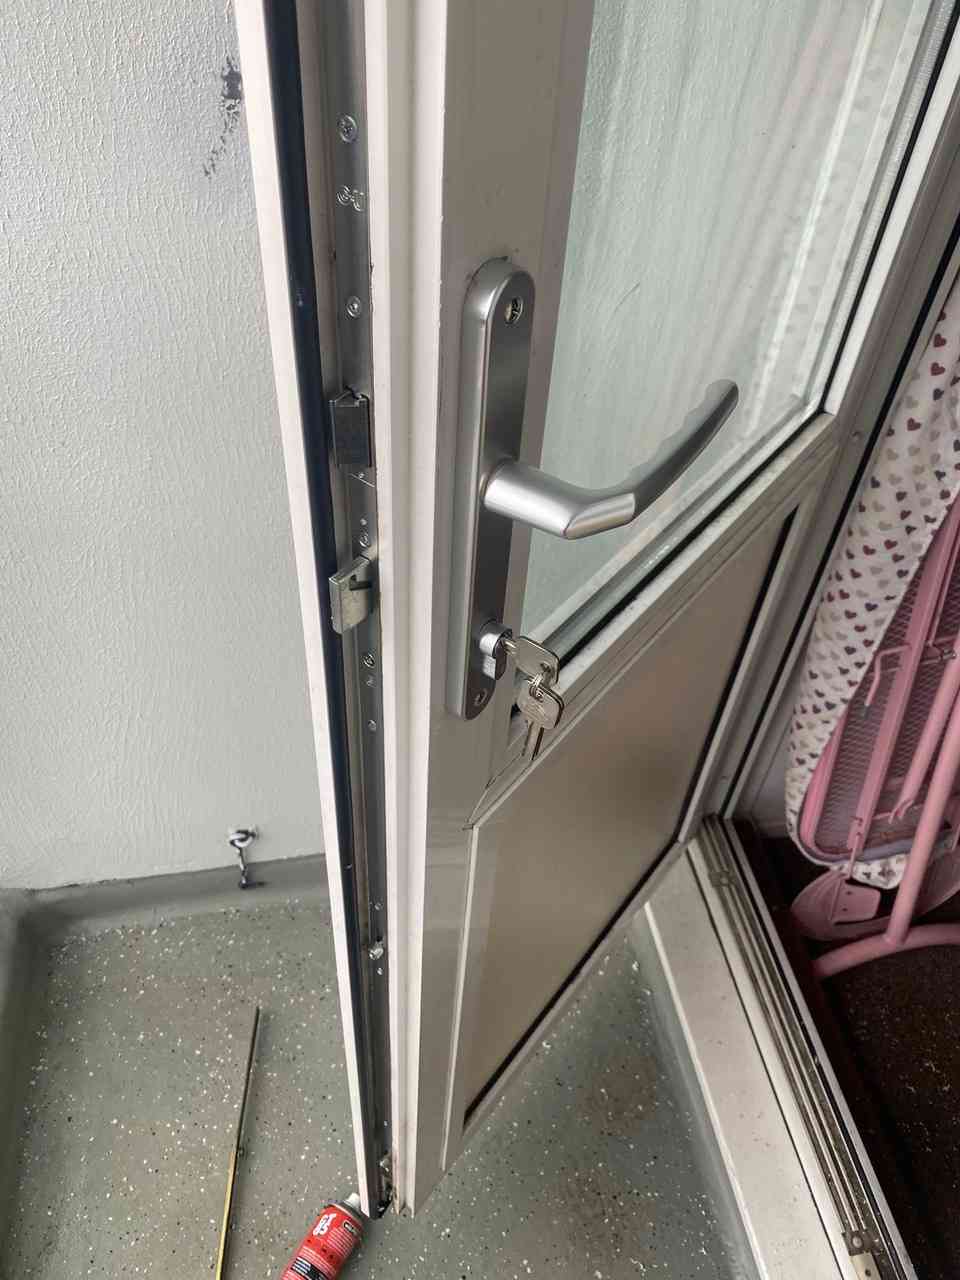 Newly fitted door lock